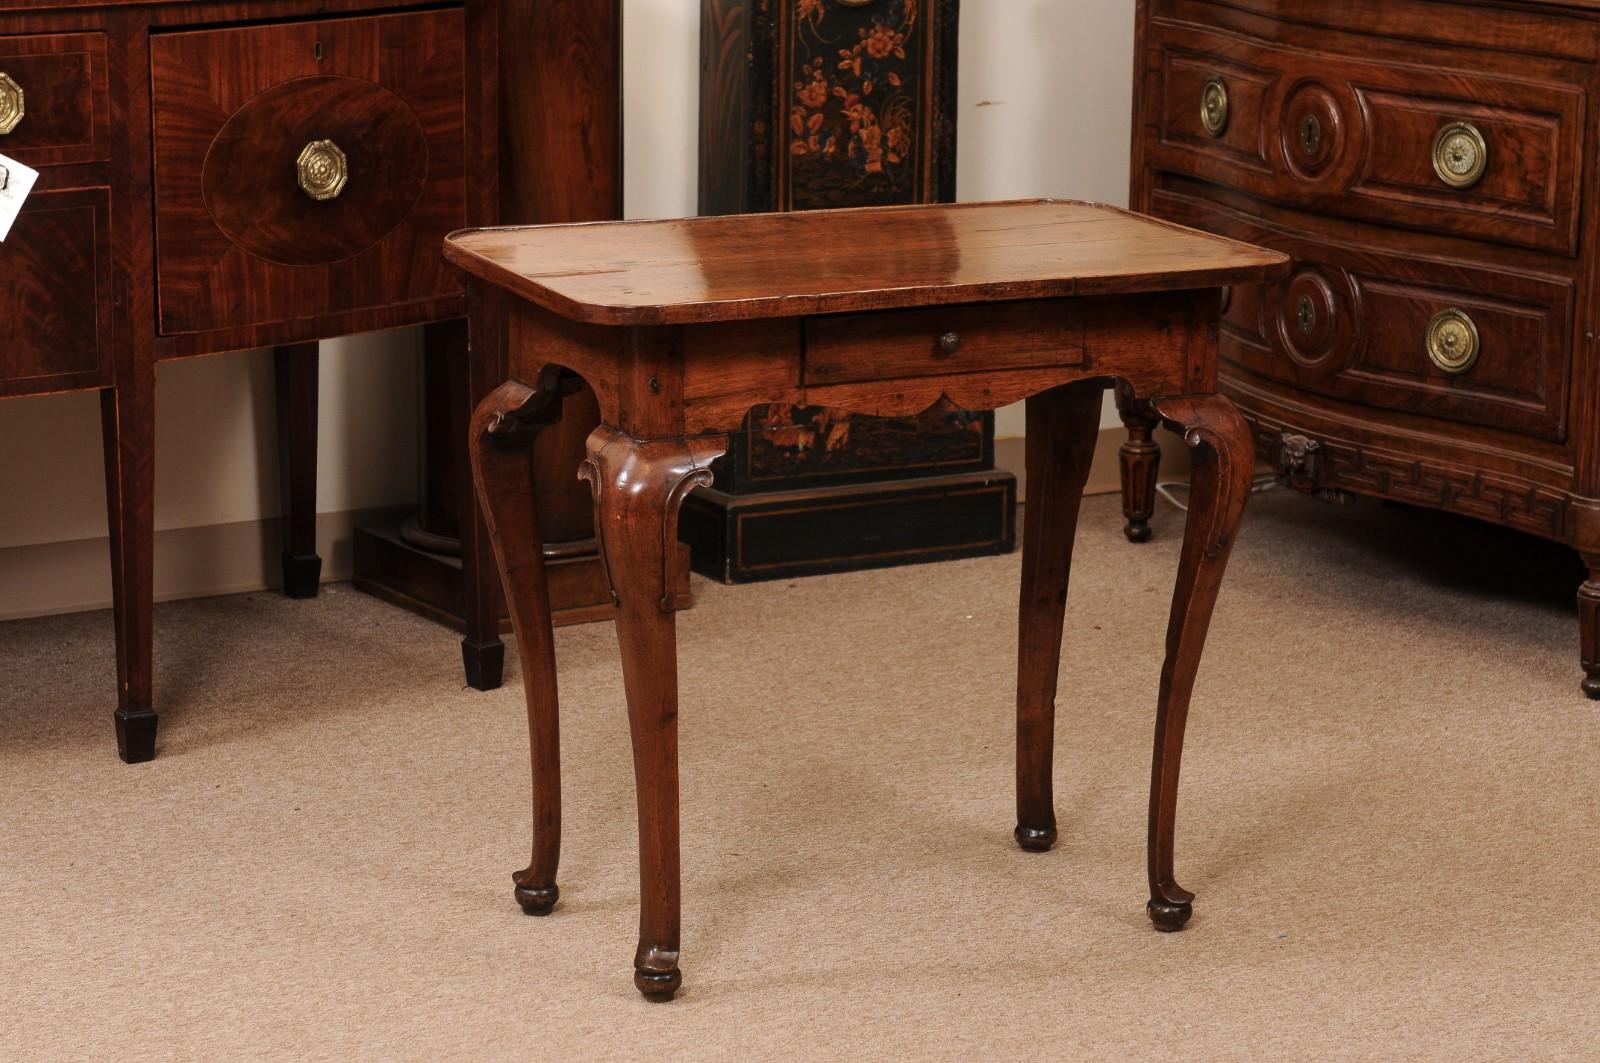 Early 18th Century Italian Walnut Side Table with Tray Top, Drawer, Cabriole Legs & Pad Feet